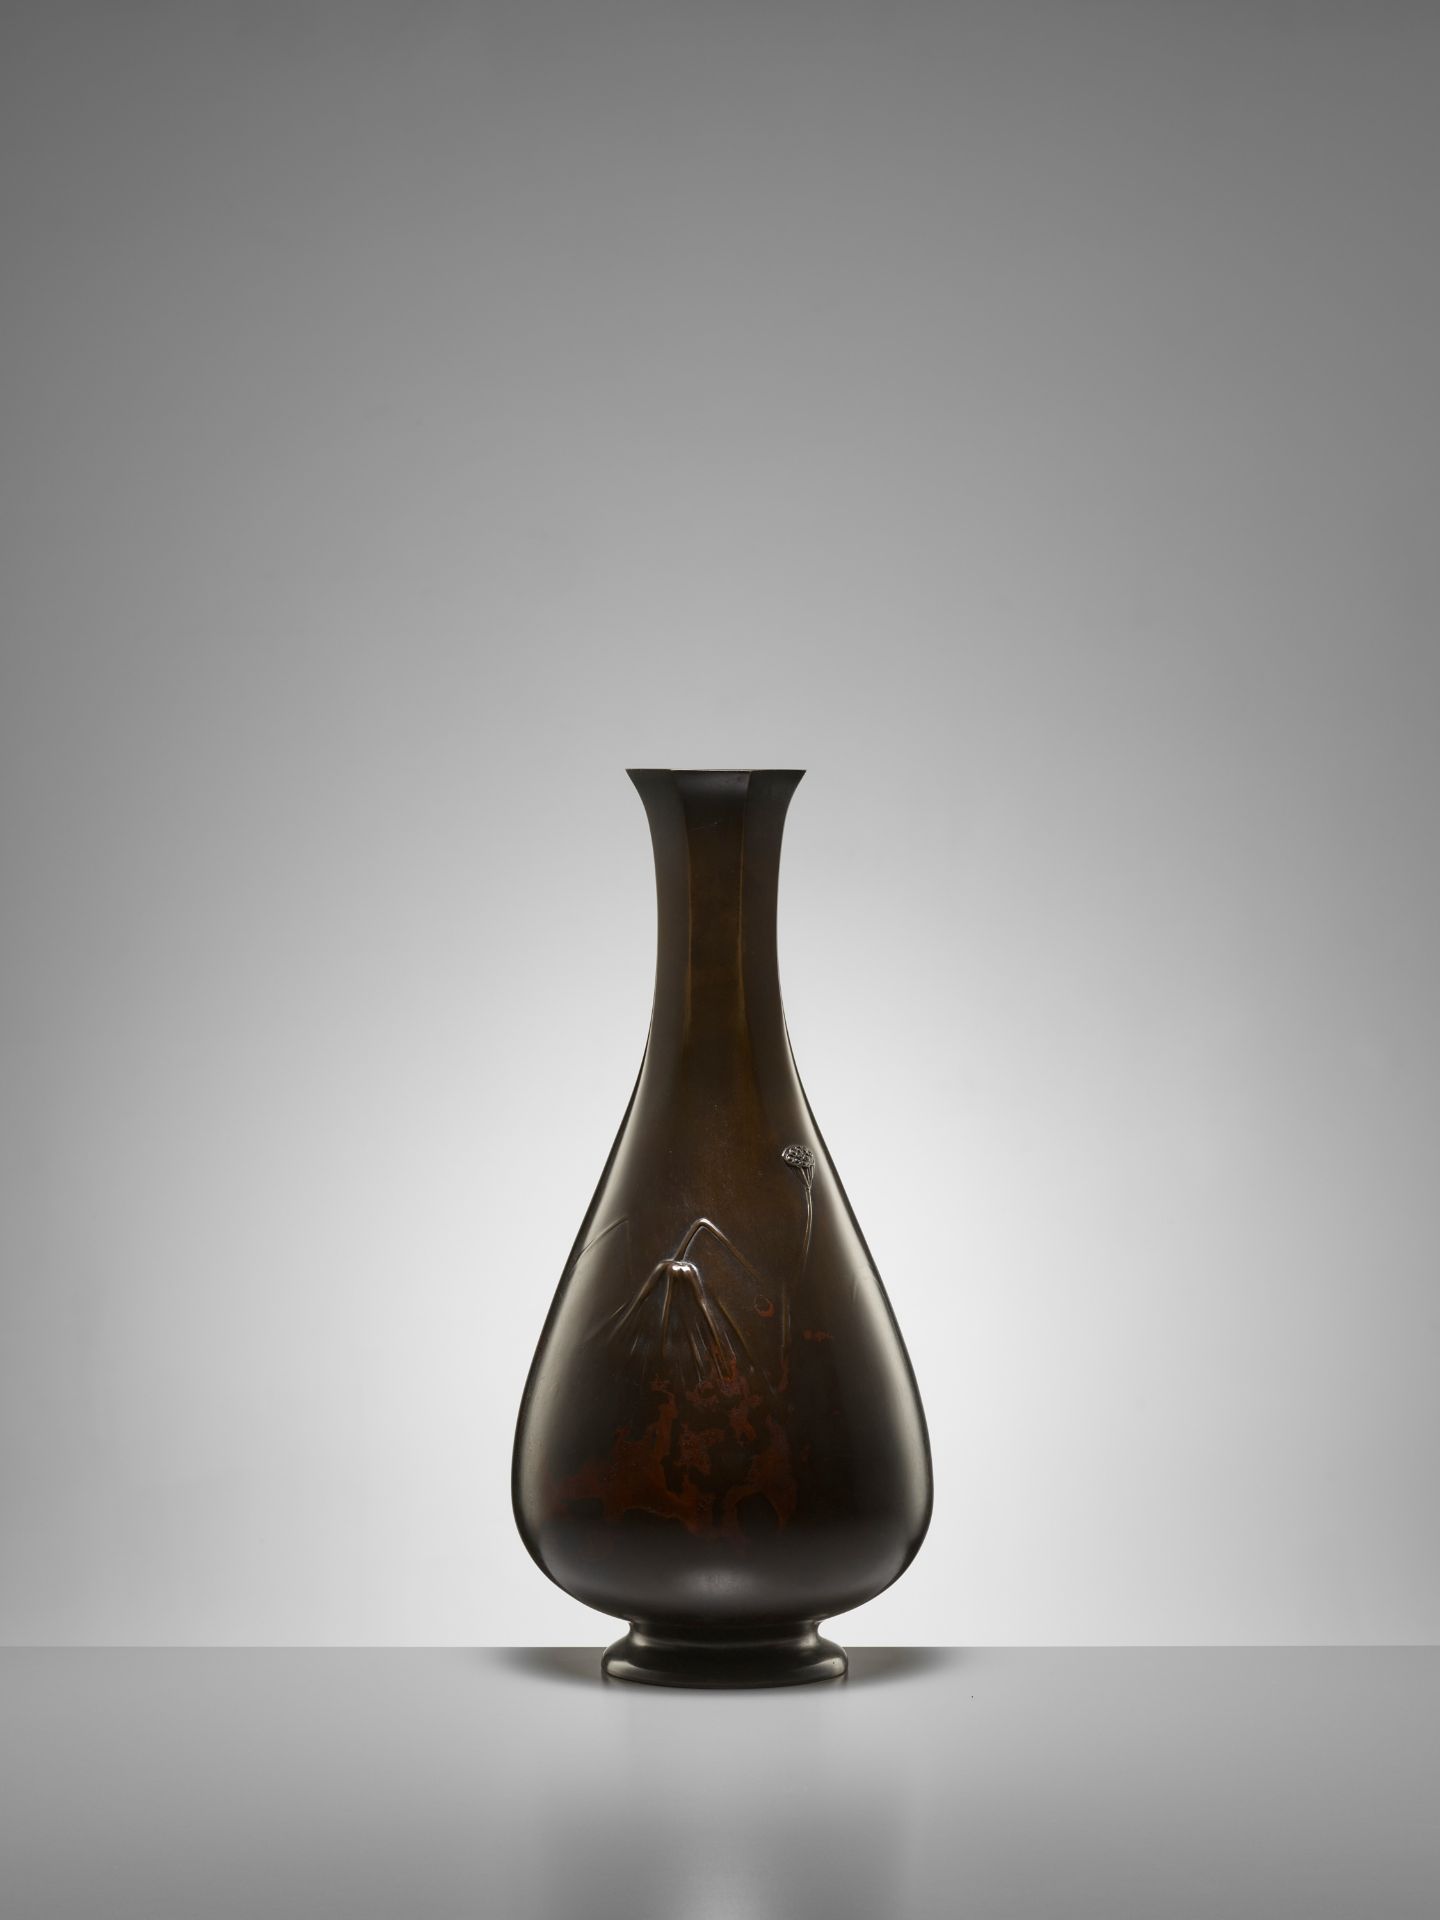 HIDEMITSU: A SUPERB AND LARGE BRONZE VASE DEPICTING HERONS AND LOTUS - Image 5 of 10